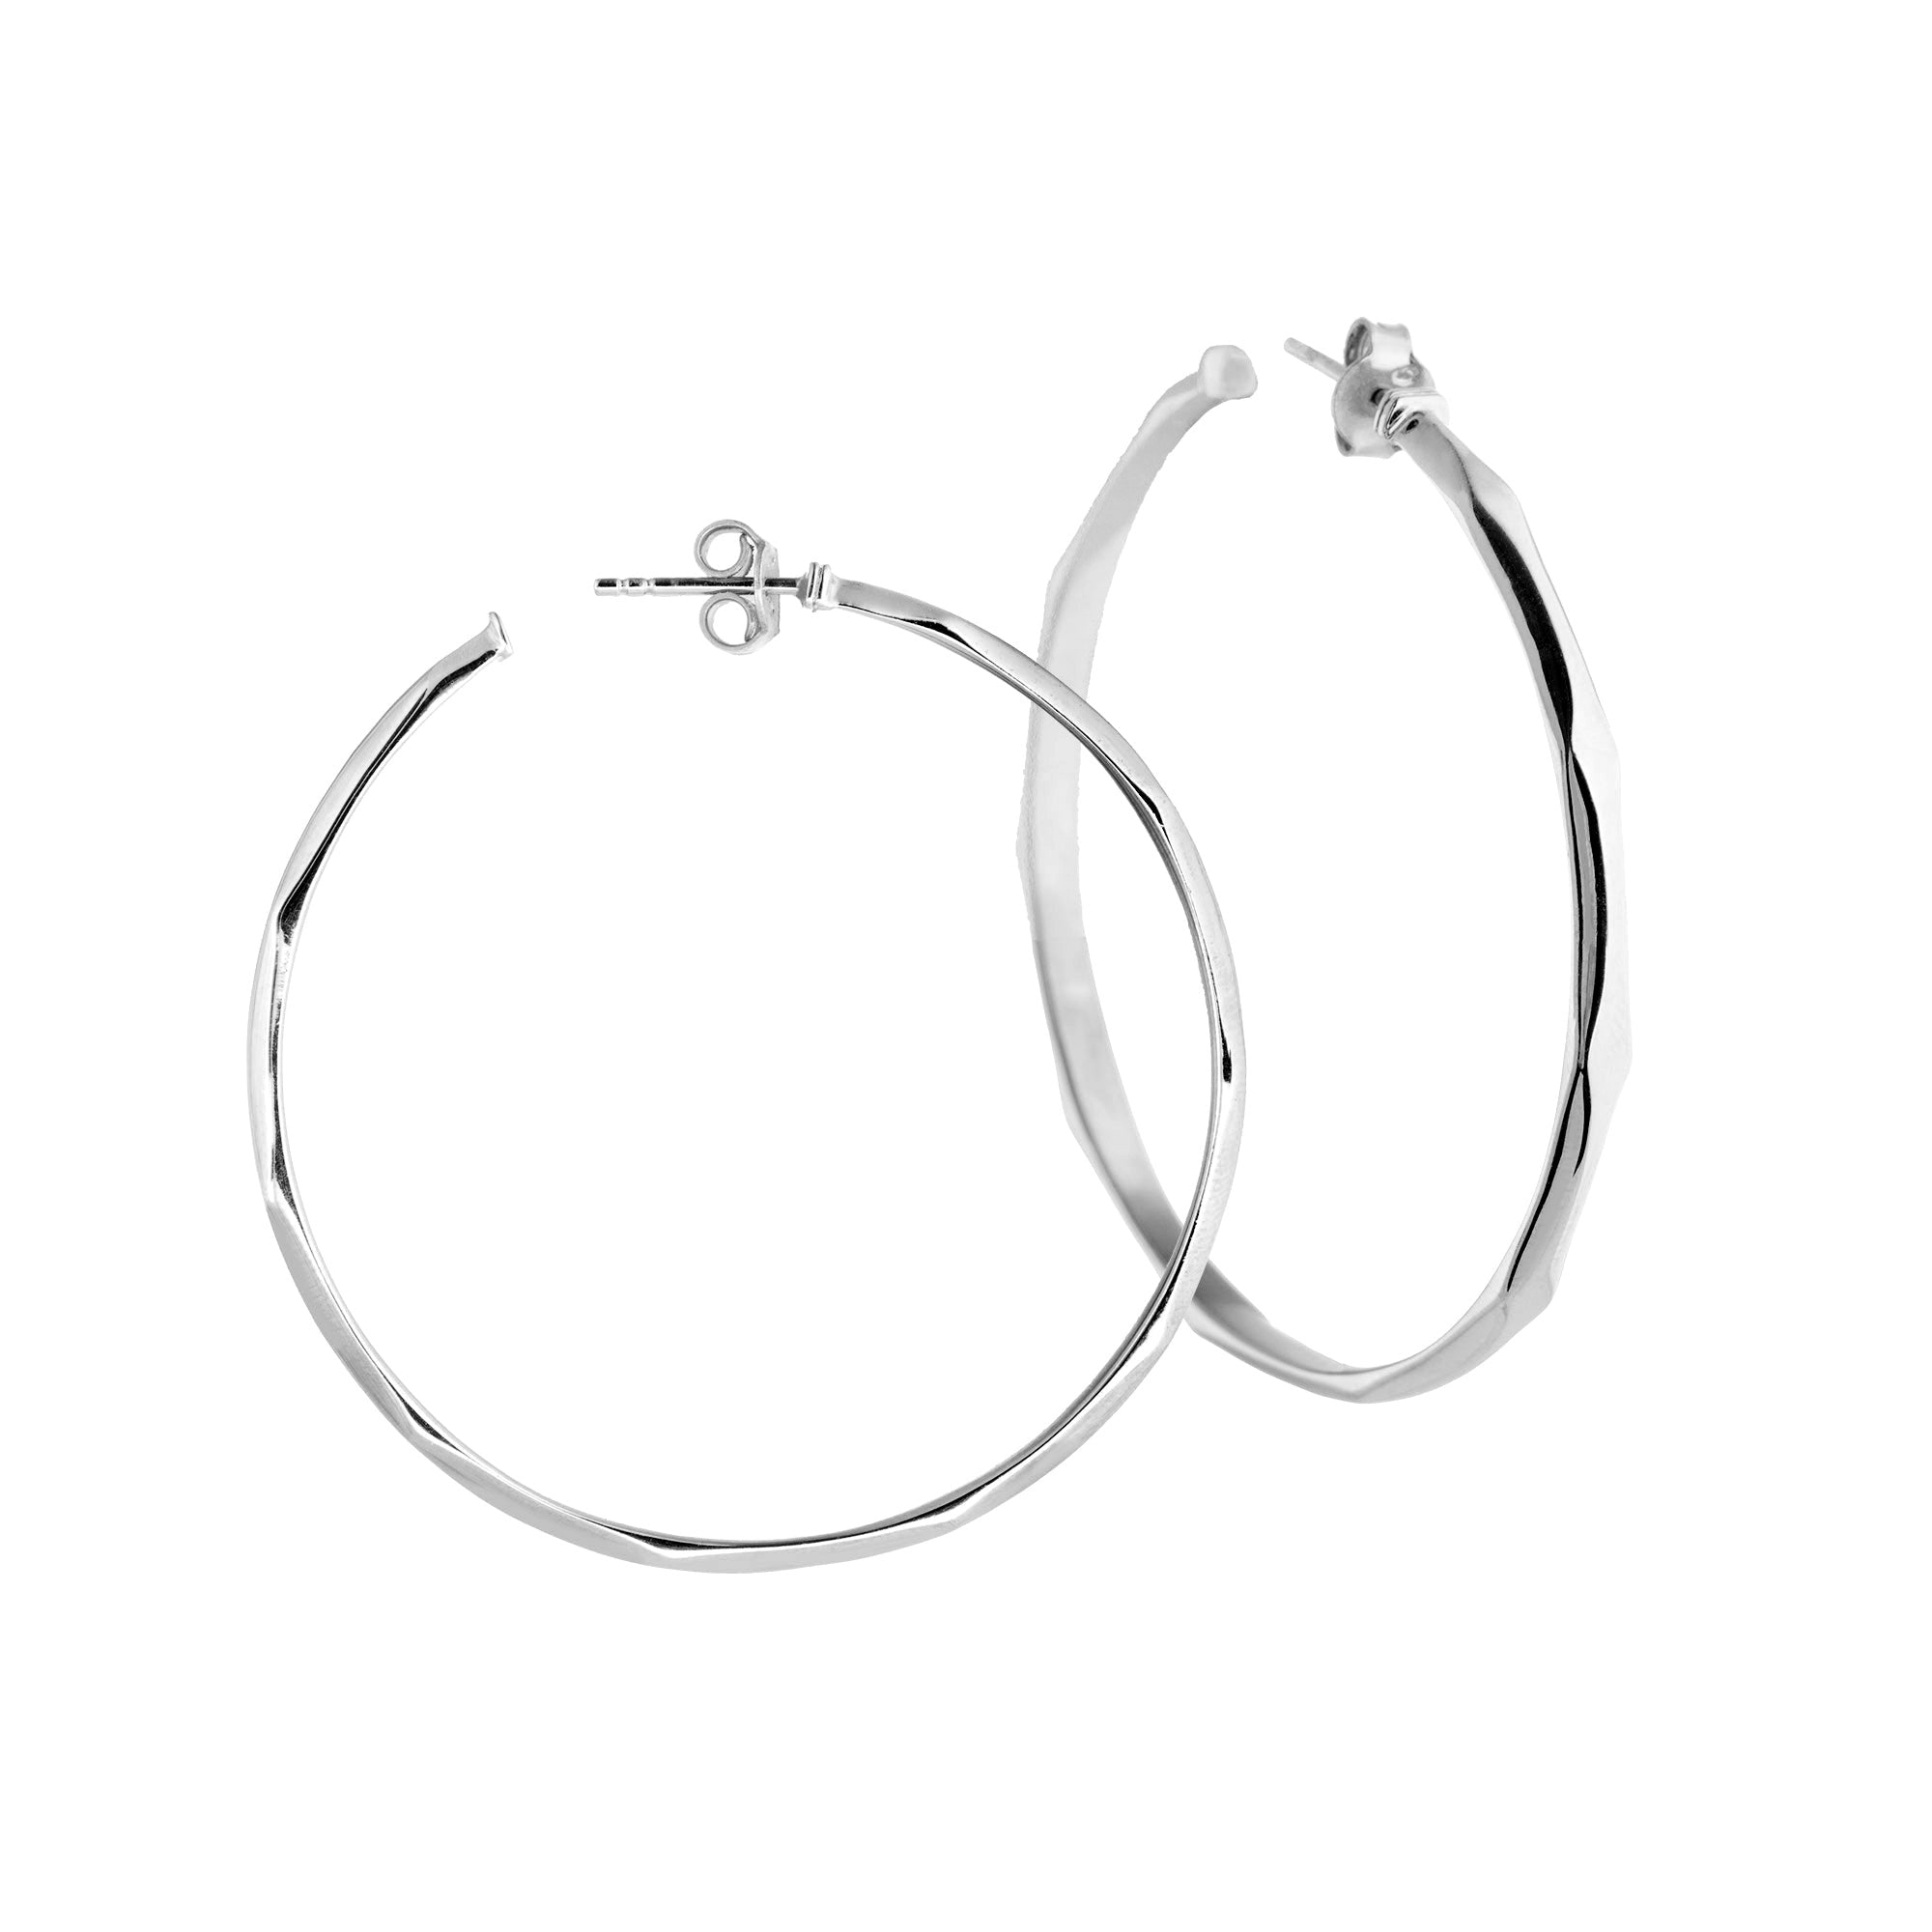 LOLO Valencia Sterling Silver Hoops